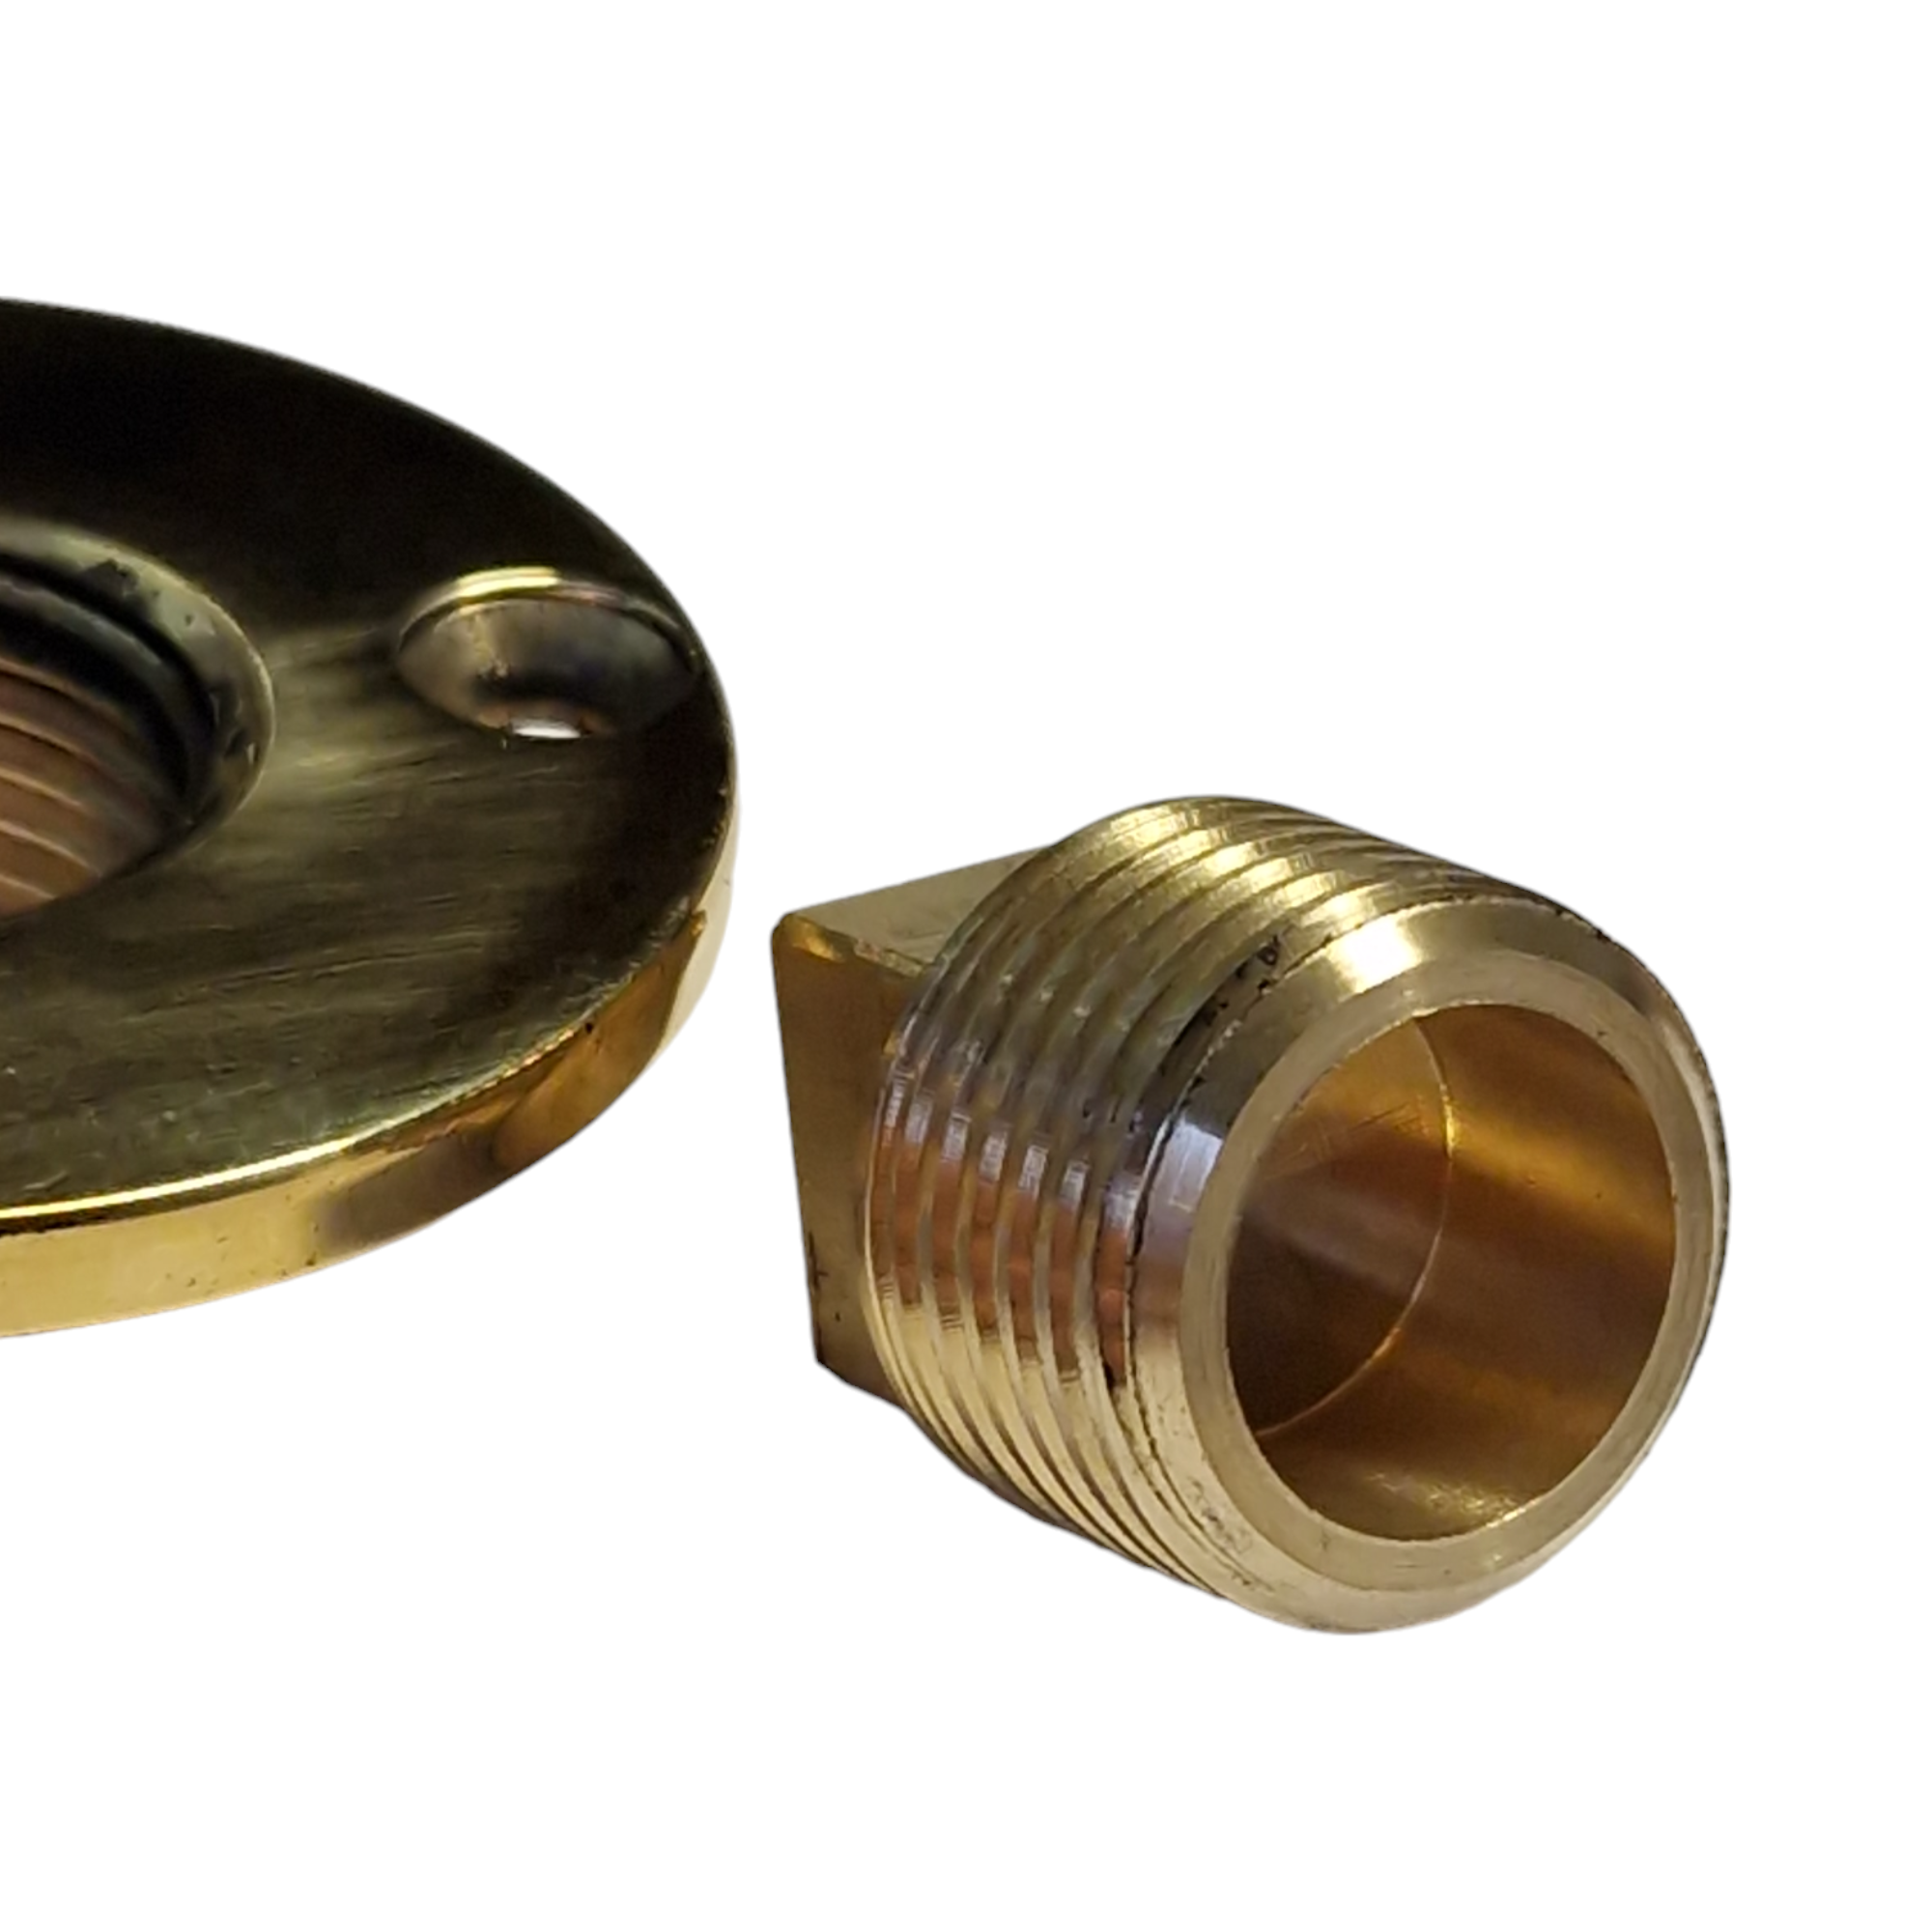 Boat Drain Bung and Socket - Brass